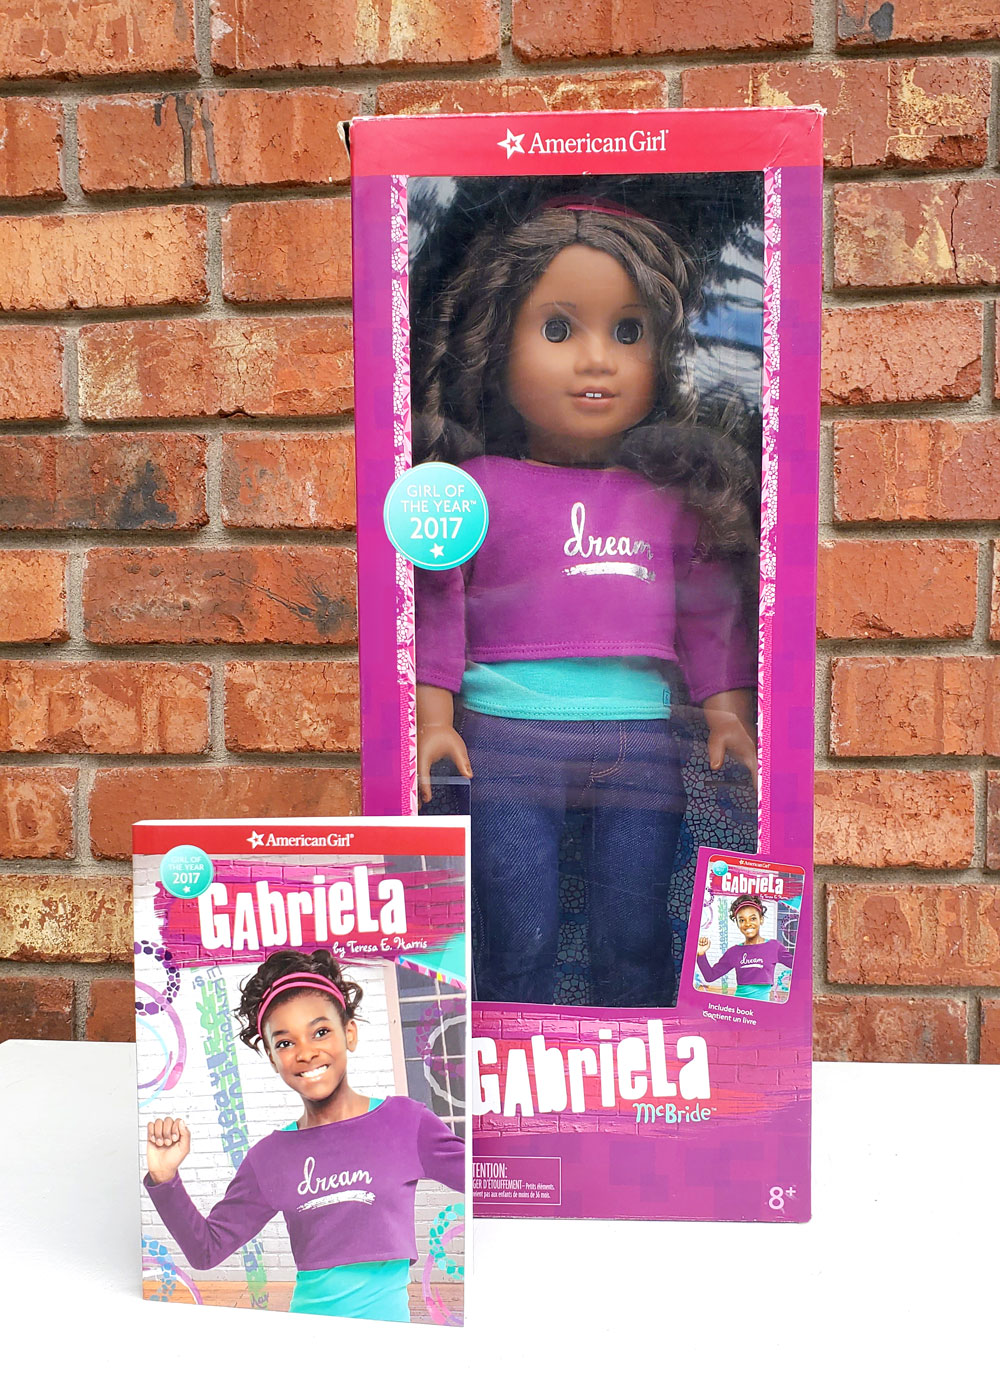 American Girl Gabriela McBride is the 2017 doll of the year and book